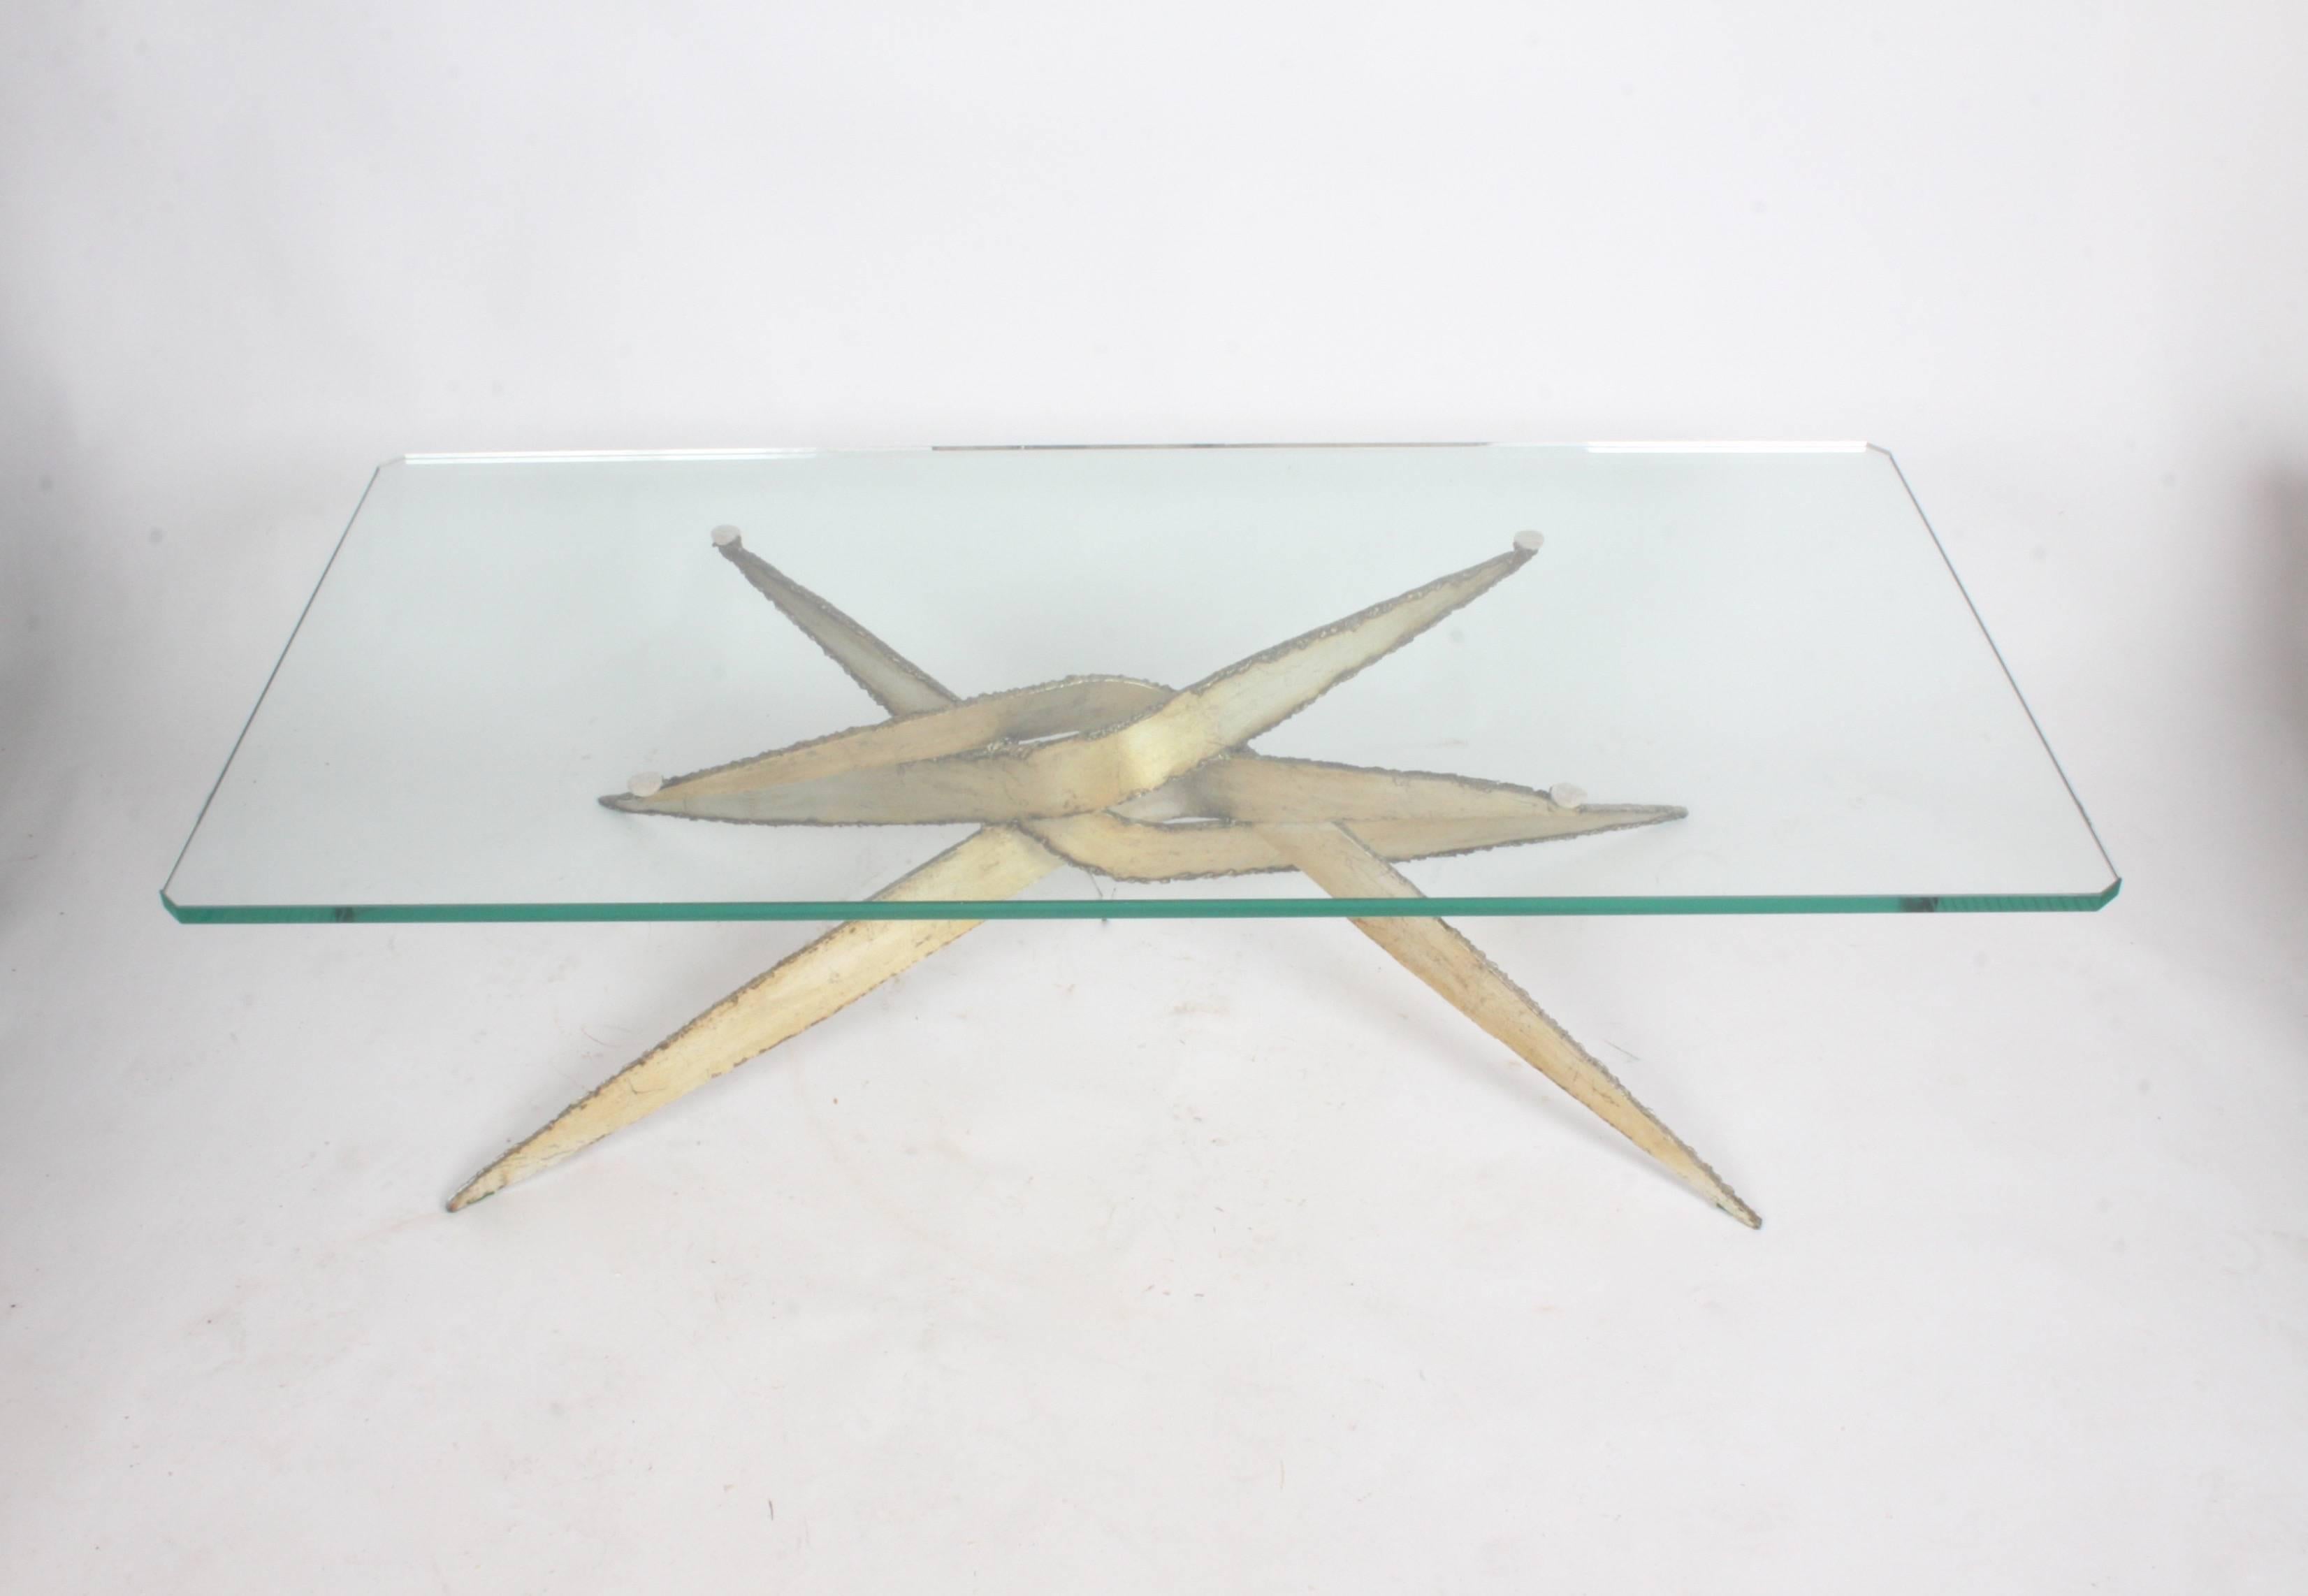 Very sculptural brutalist 1970s torch cut metal base with thick glass top coffee table. Metal base has applied brass / silver patina. This table is stamped Mexico, but is in the style of Silas Seandel or Paul Evans. Purchased from the original owner